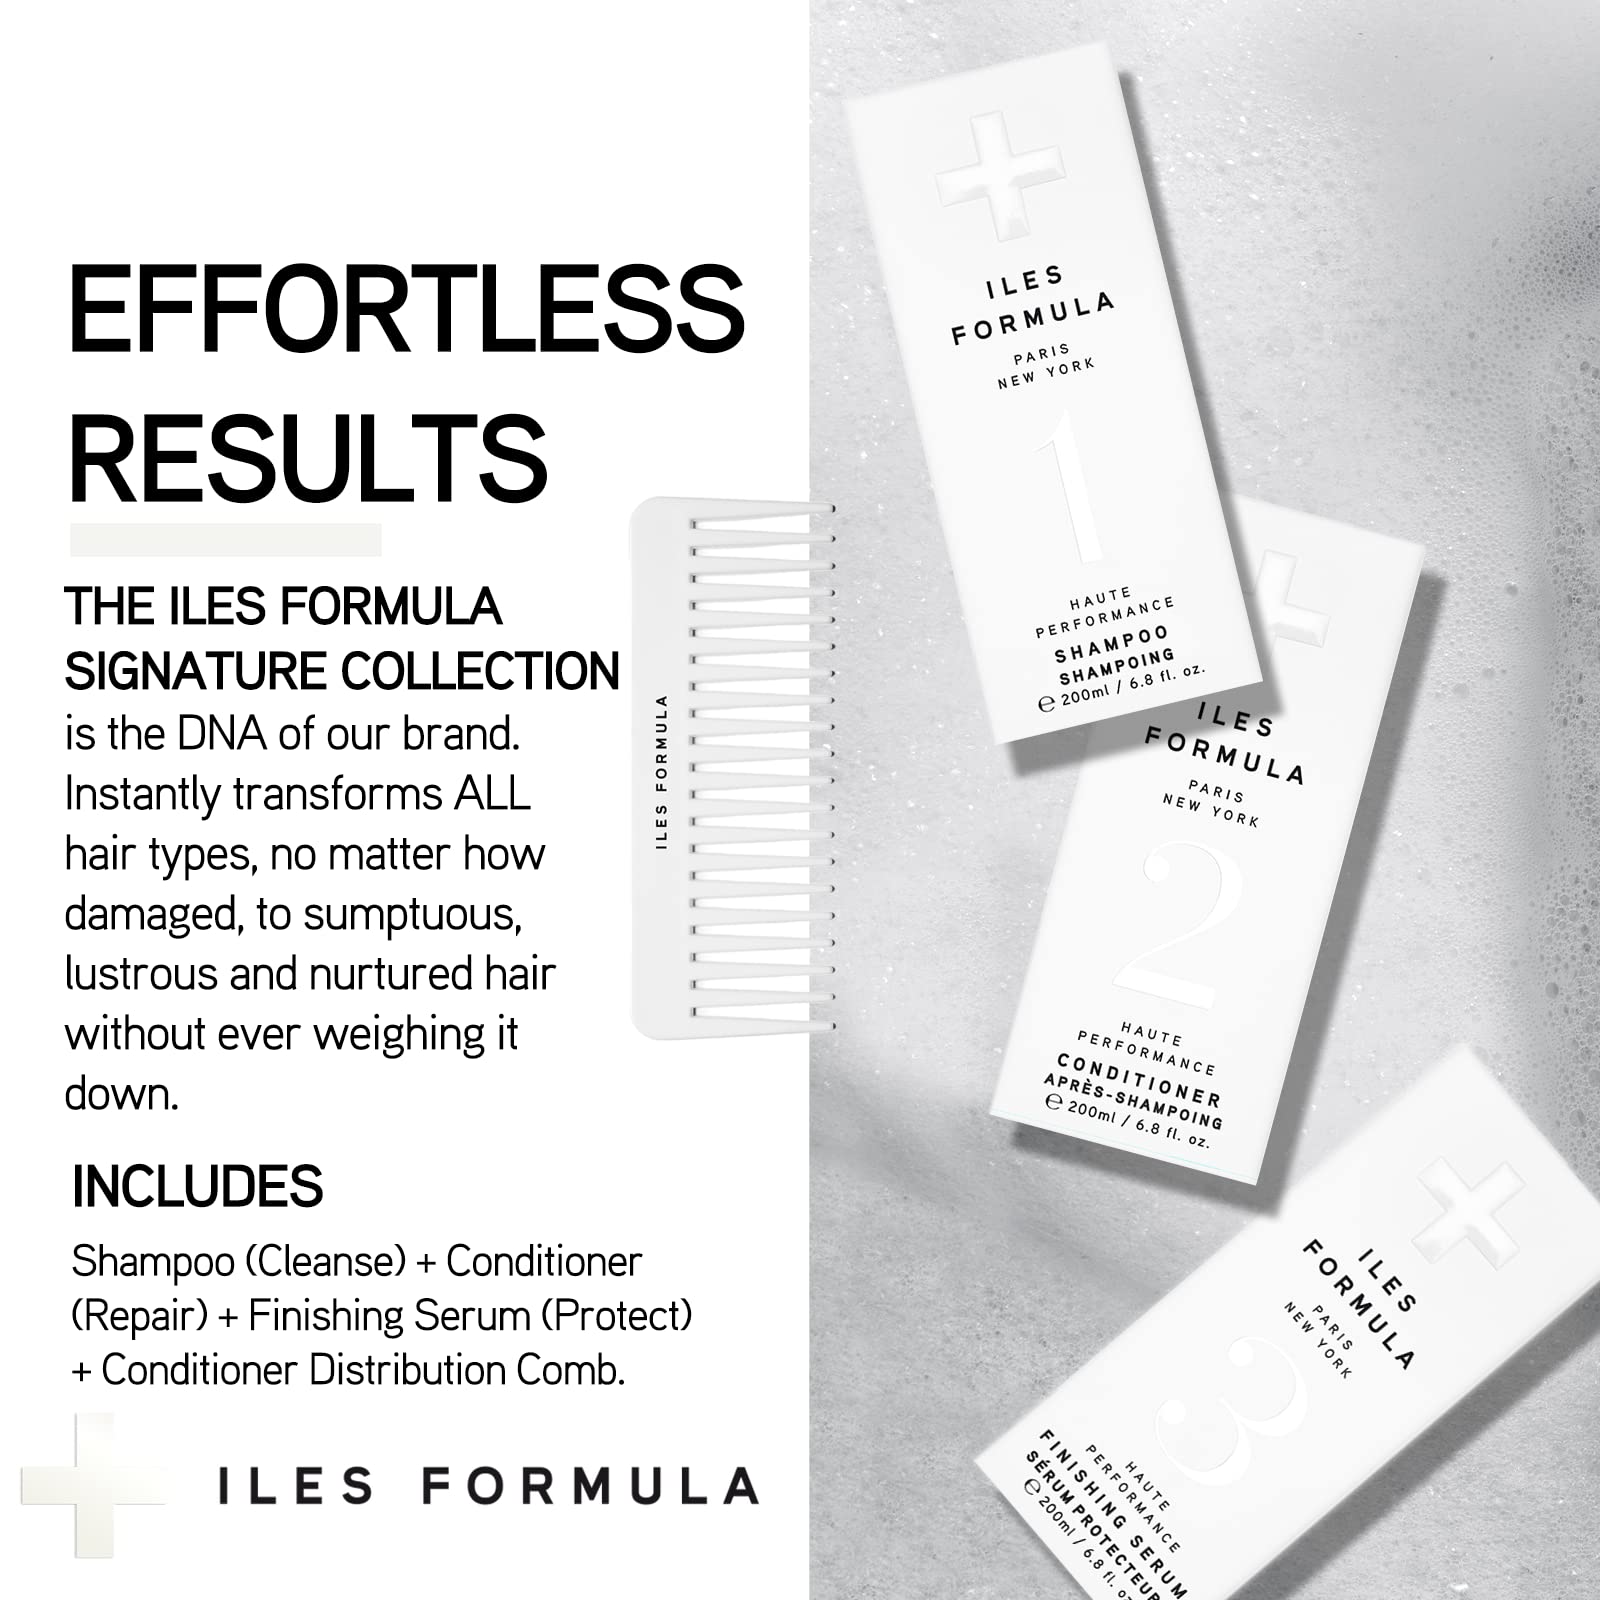 Iles Formula Signature Collection Box: Cleanse, Repair, and Protect All Hair Types, Haute Performance Shampoo + Conditioner + Finishing Serum & Comb, 6.8 Fl Oz (200 ML)